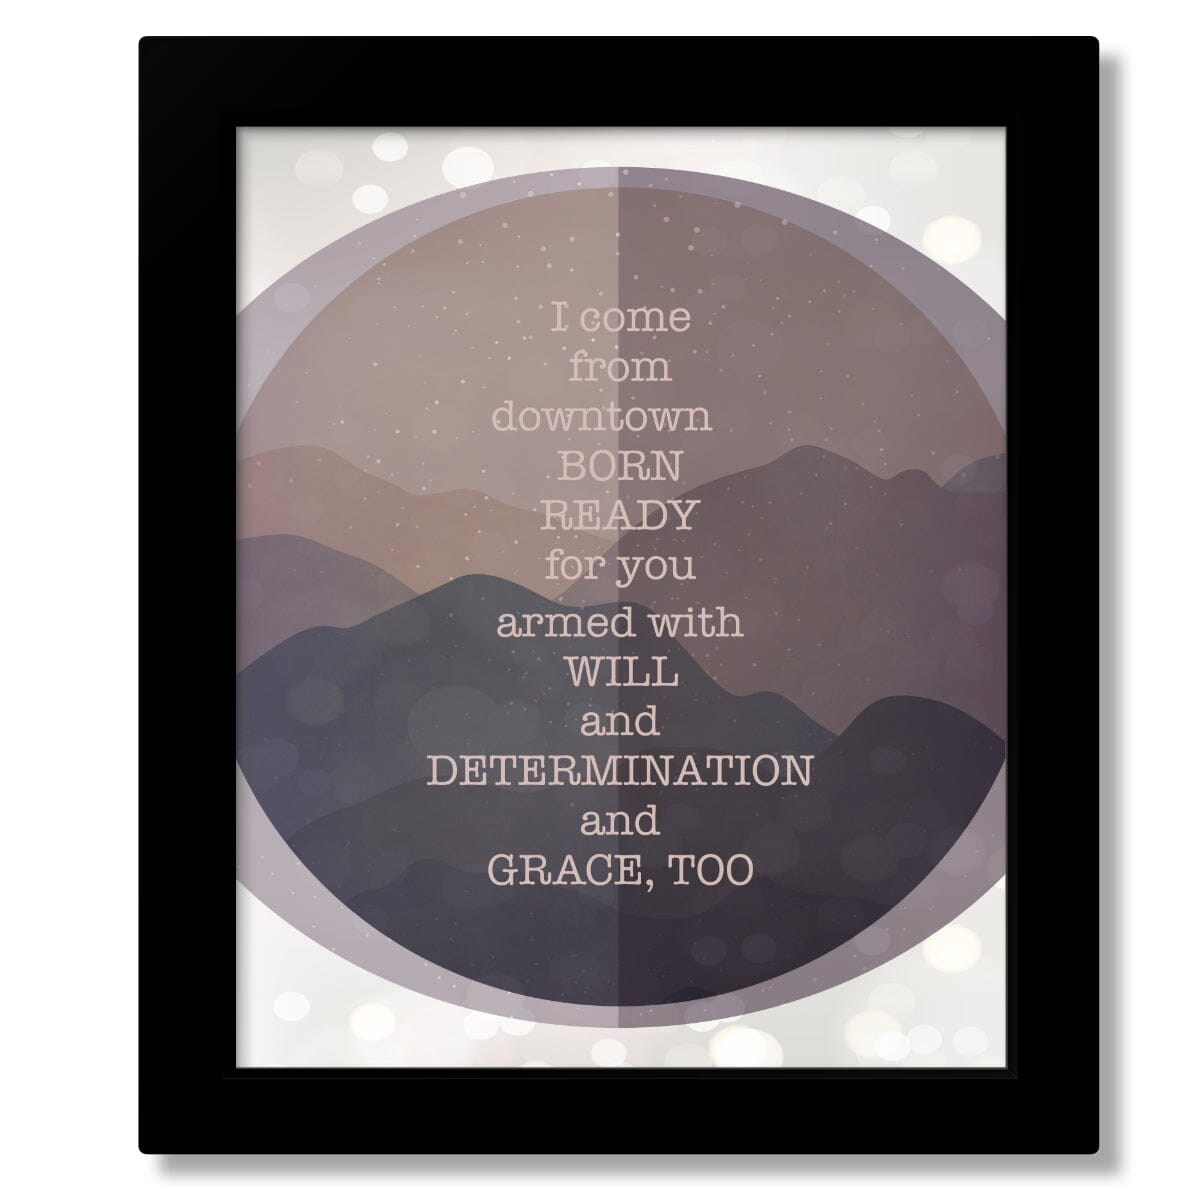 Grace, Too by the Tragically Hip - Music Quote Wall Decor Song Lyrics Art Song Lyrics Art 8x10 Framed Print (without mat) 